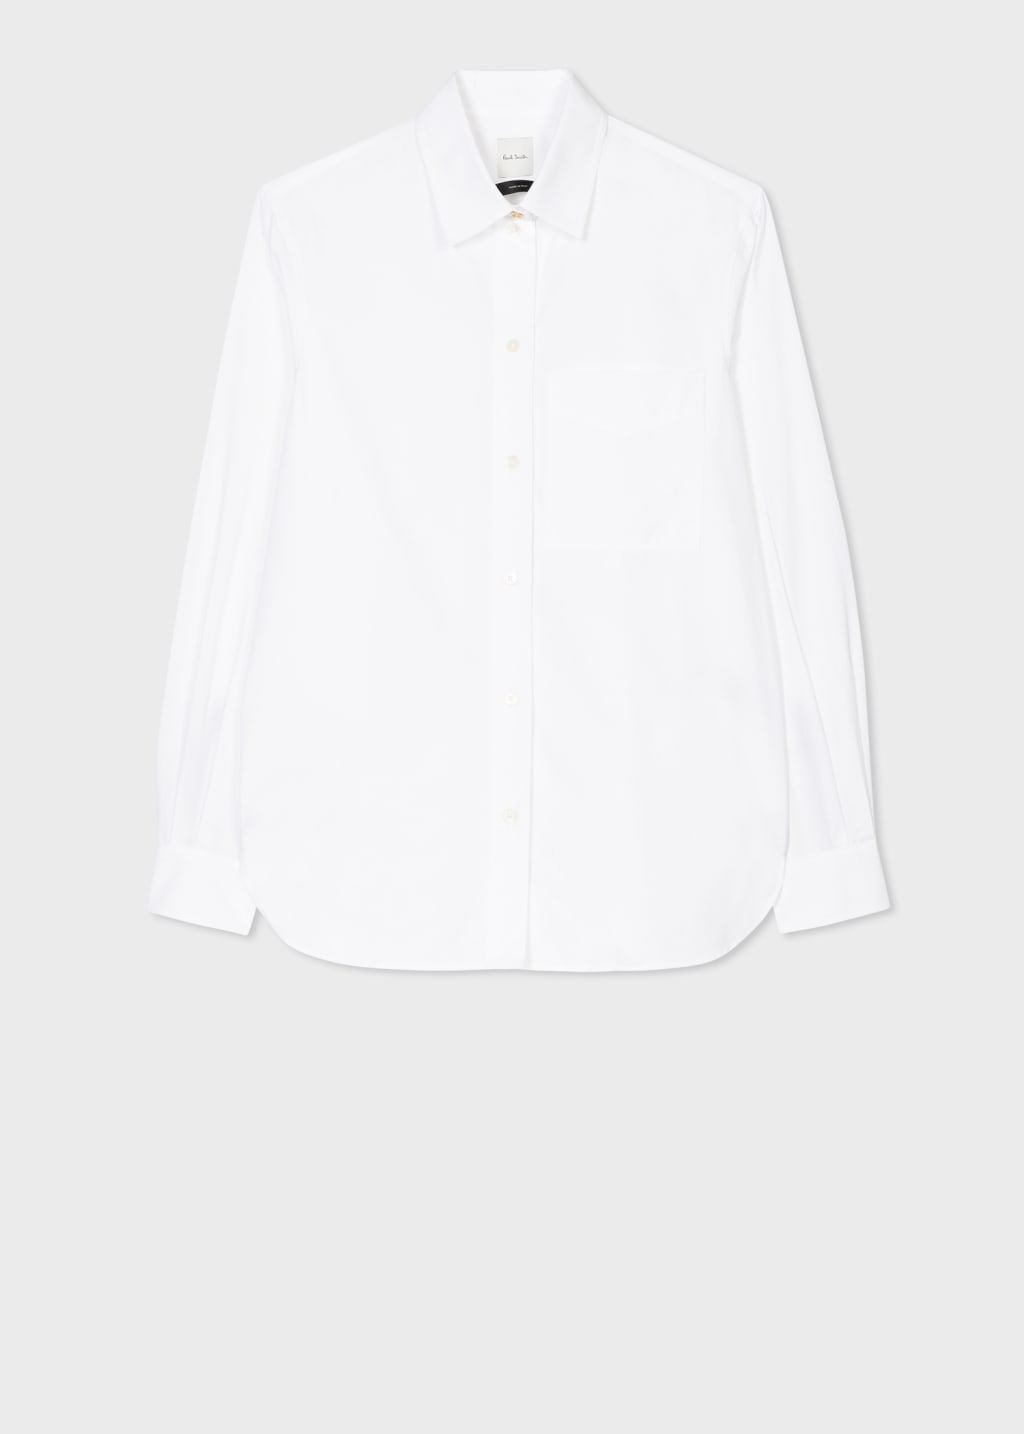 Product View - Women's White 'Signature Stripe' Shirt by Paul Smith